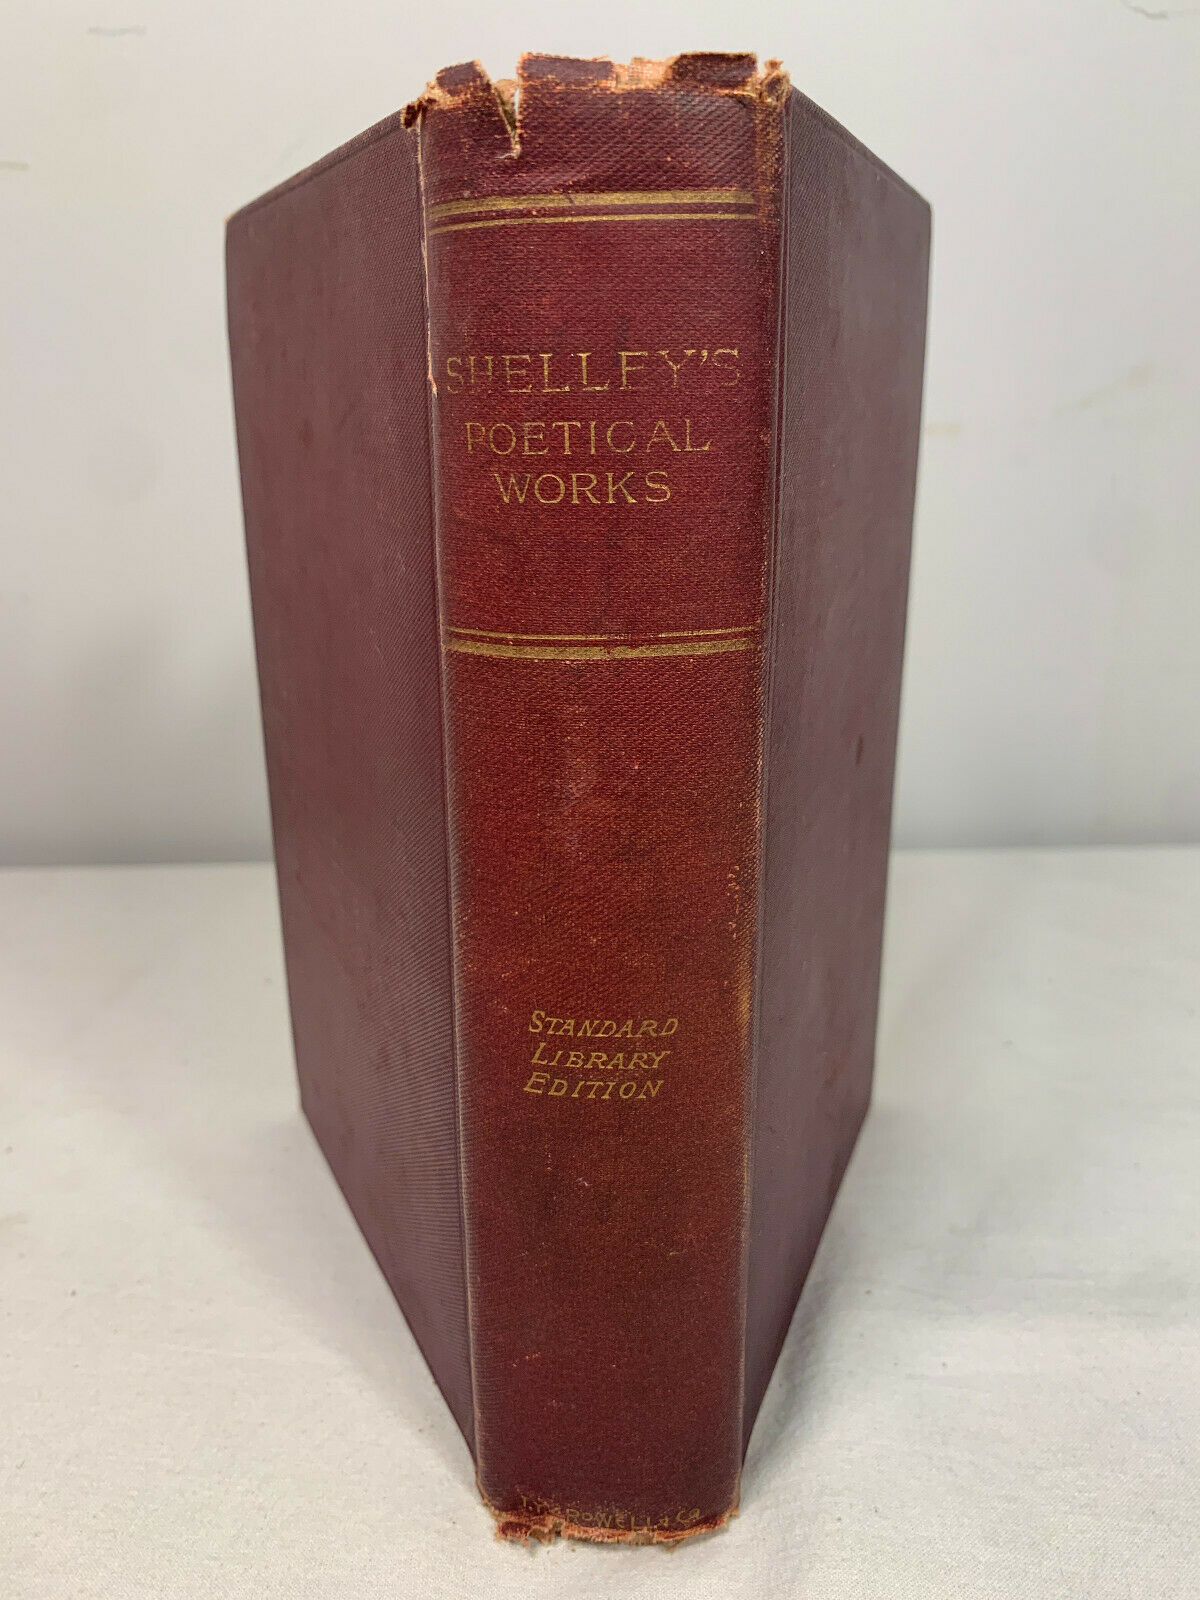 The Poetical Works of Percy Shelley Standard Library Edition, early1900s C5